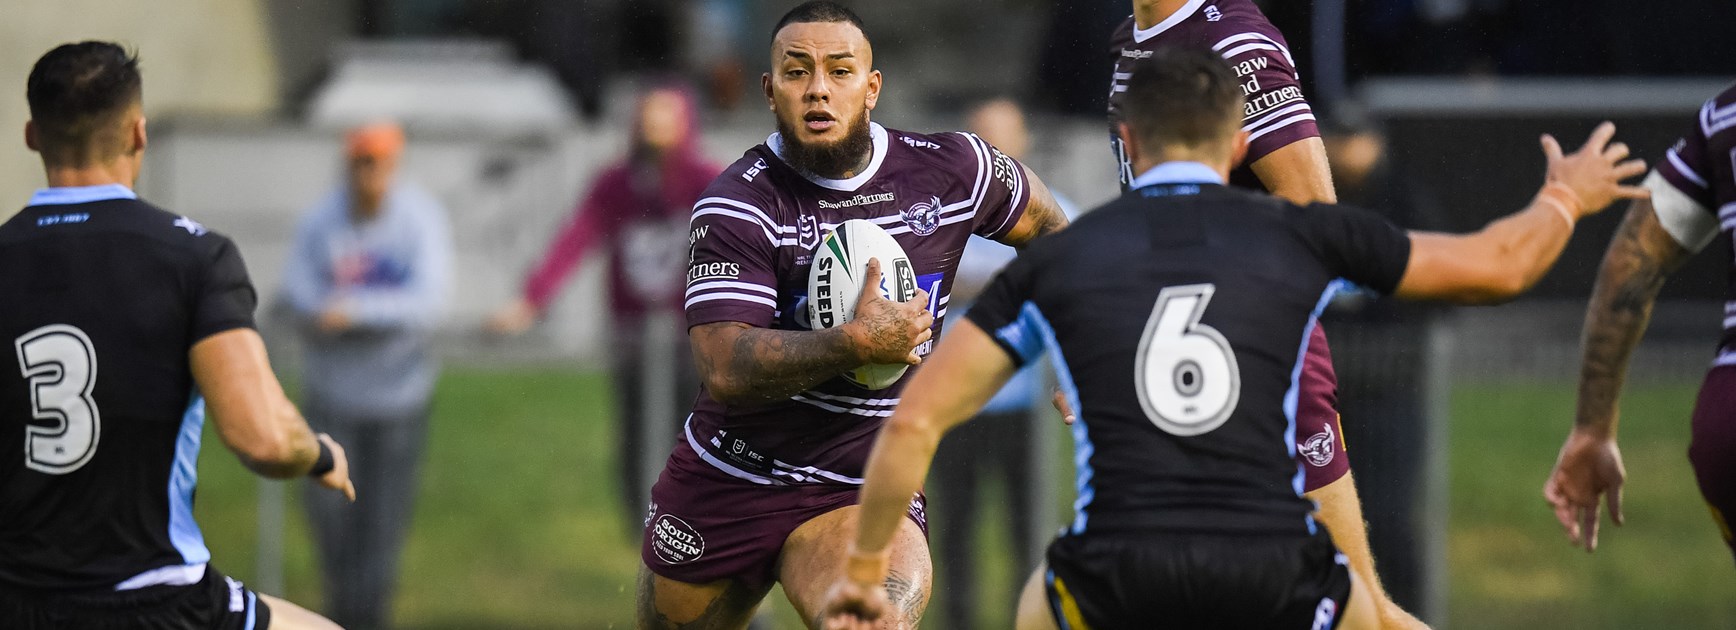 Hasler expects Fonua-Blake to excel